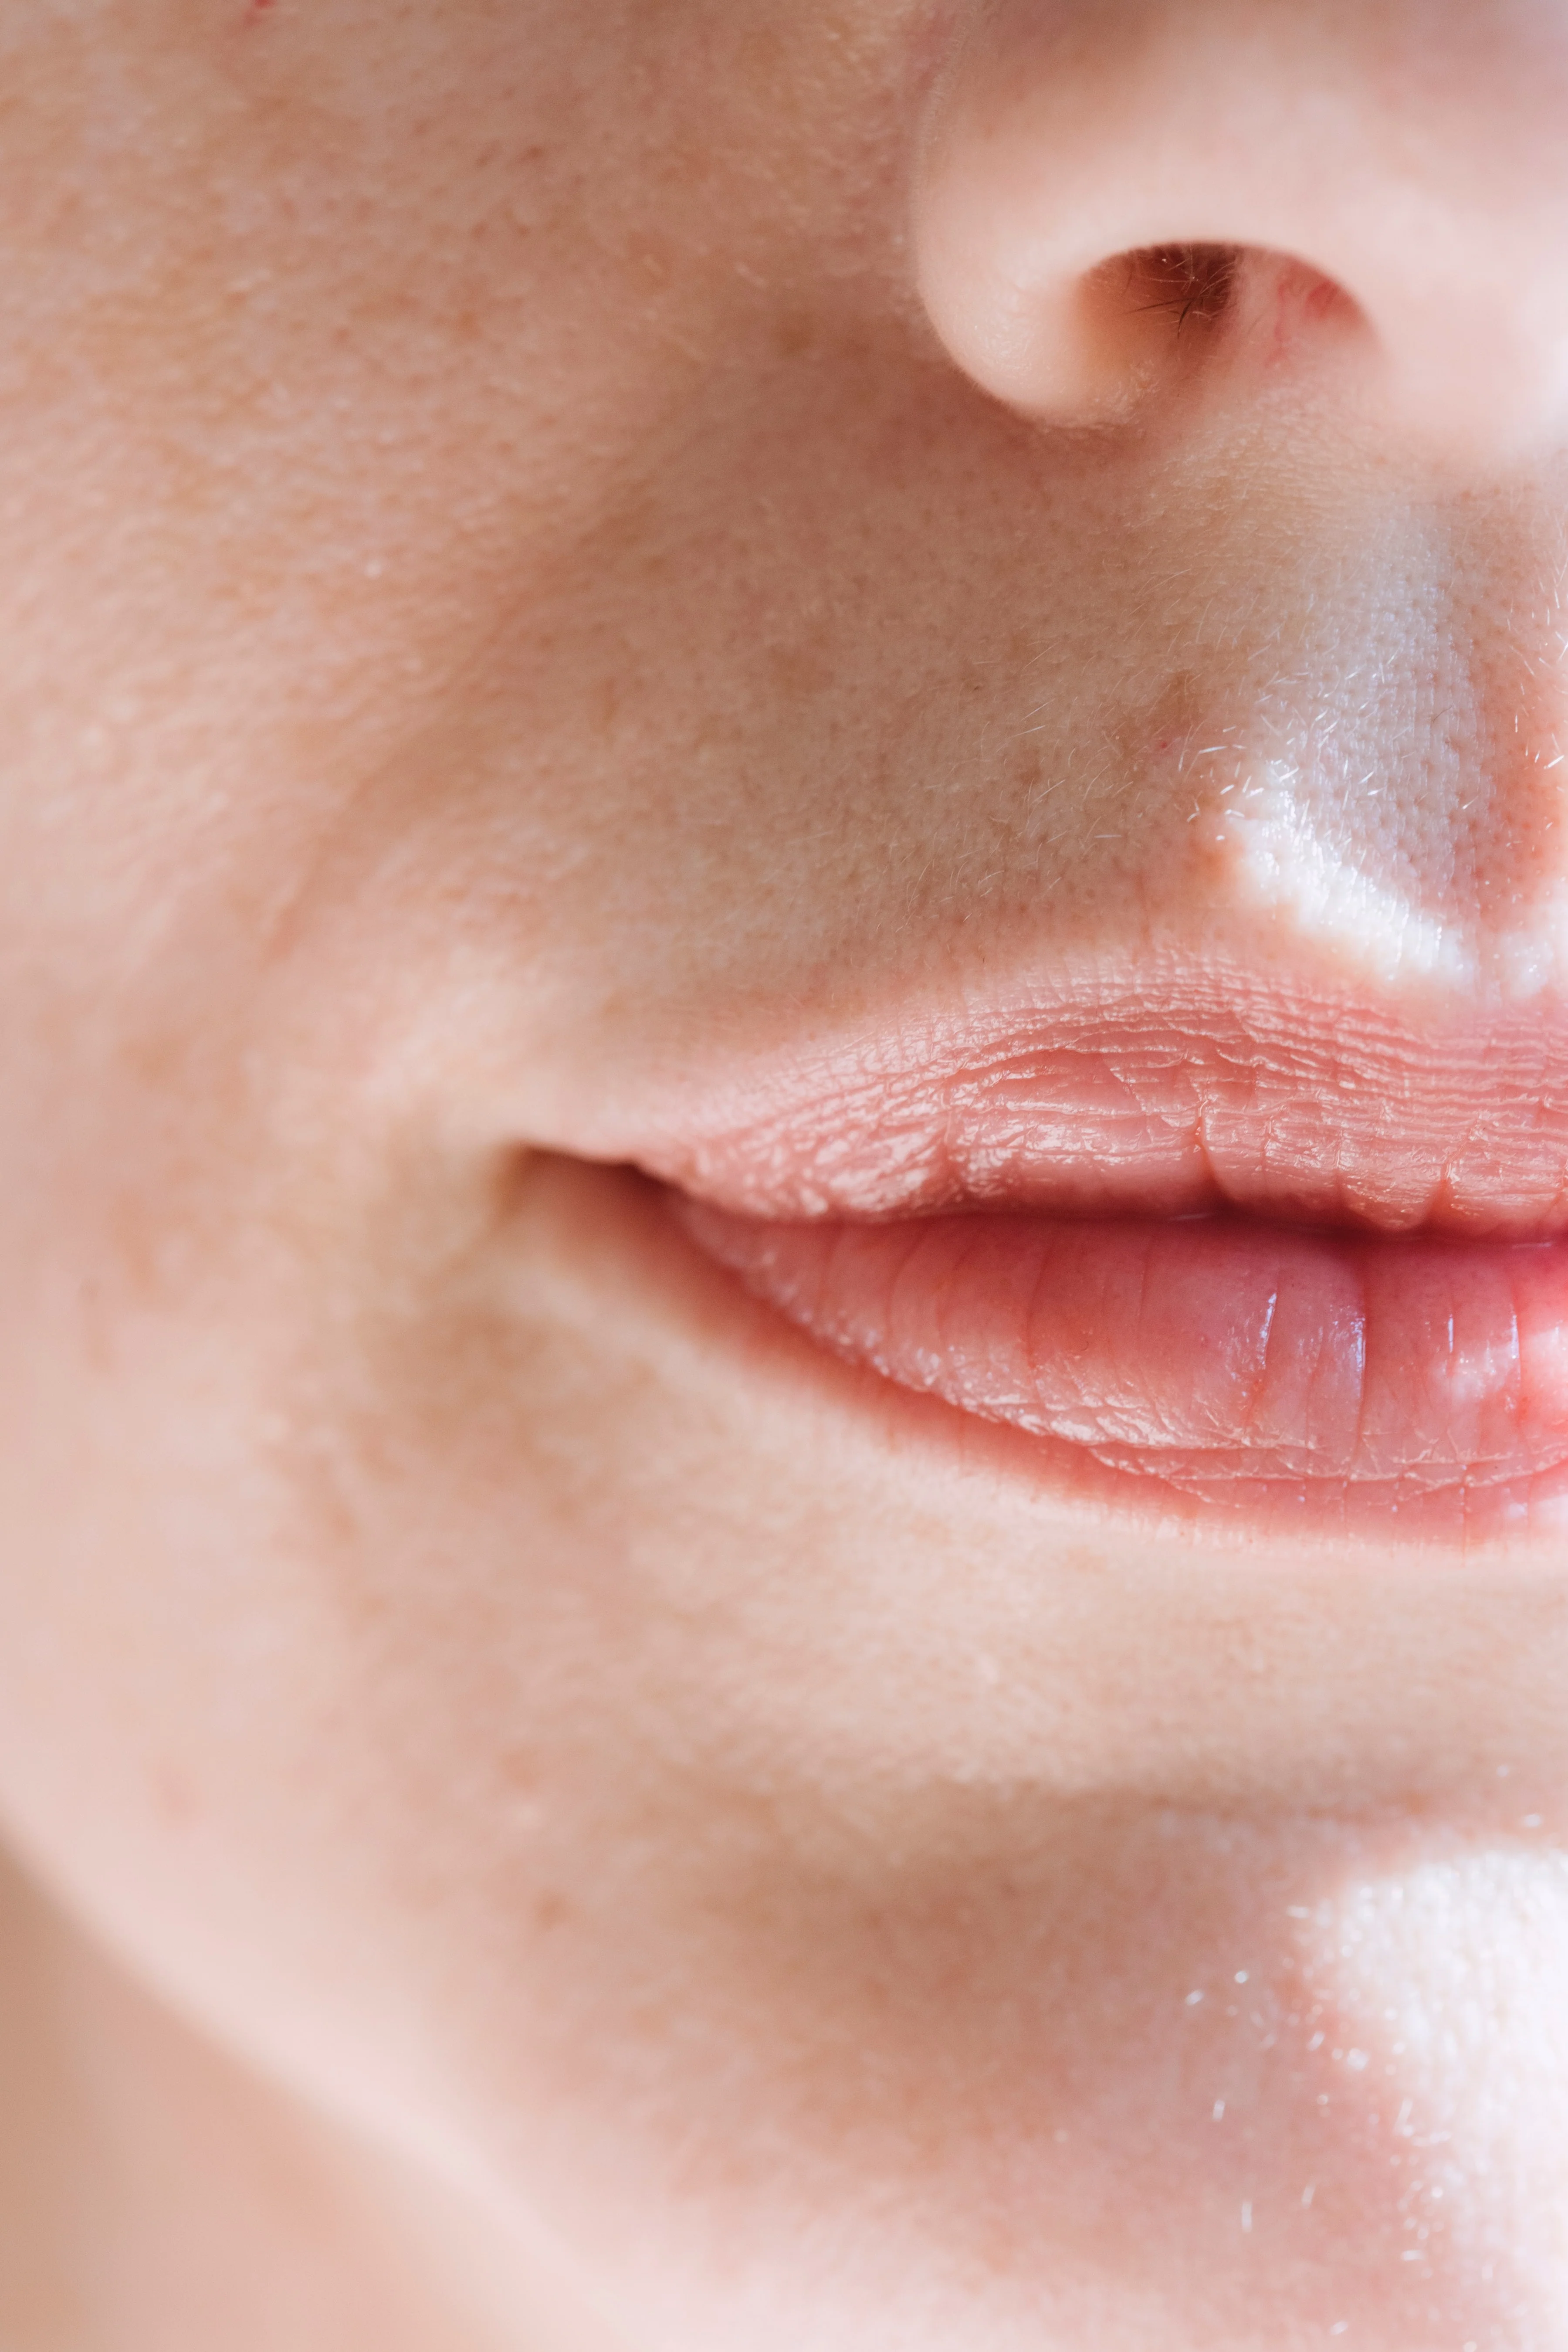 Lip blushing removal treatment - results image.